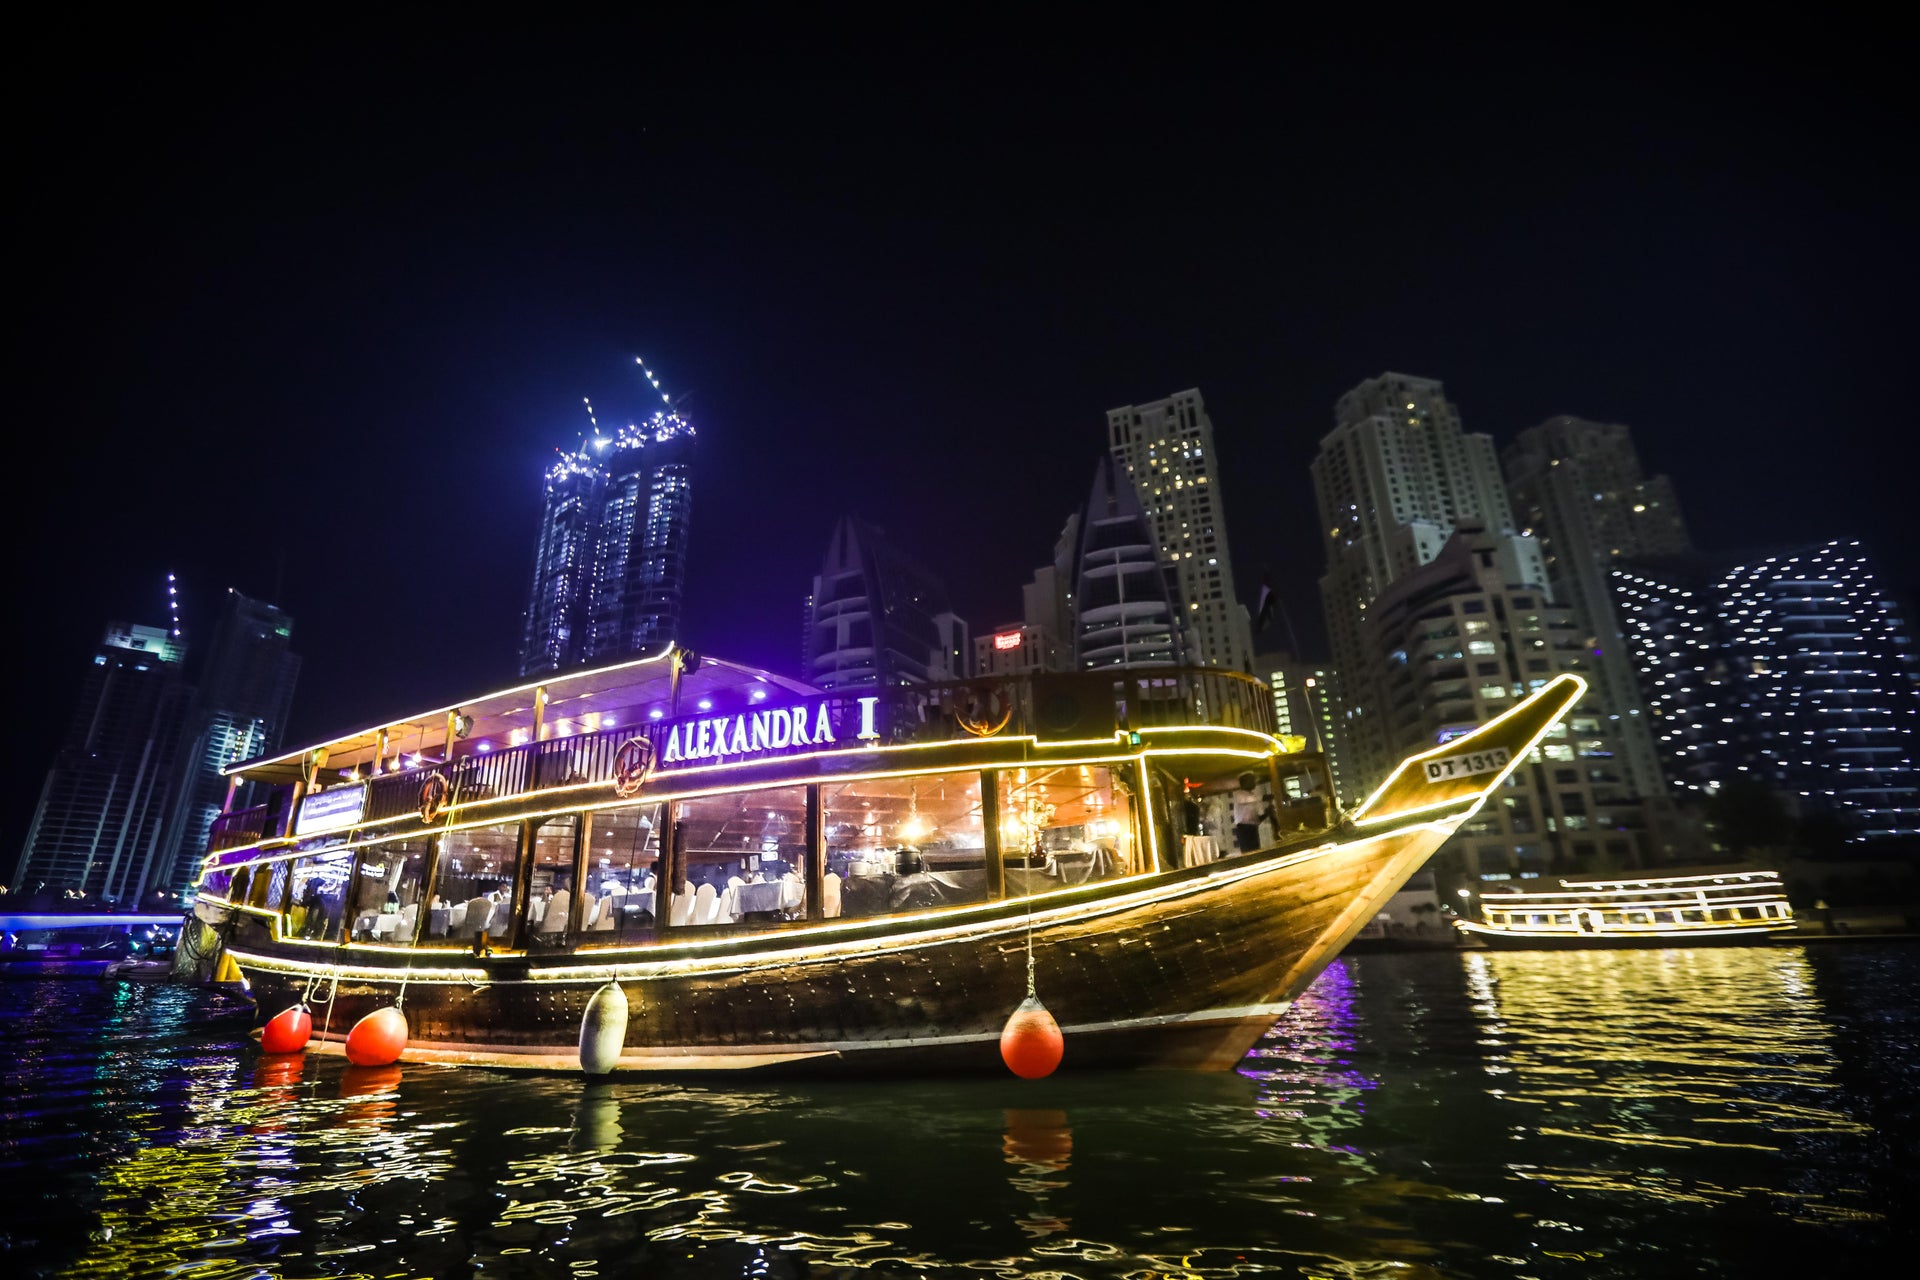 dhow cruise sharjah